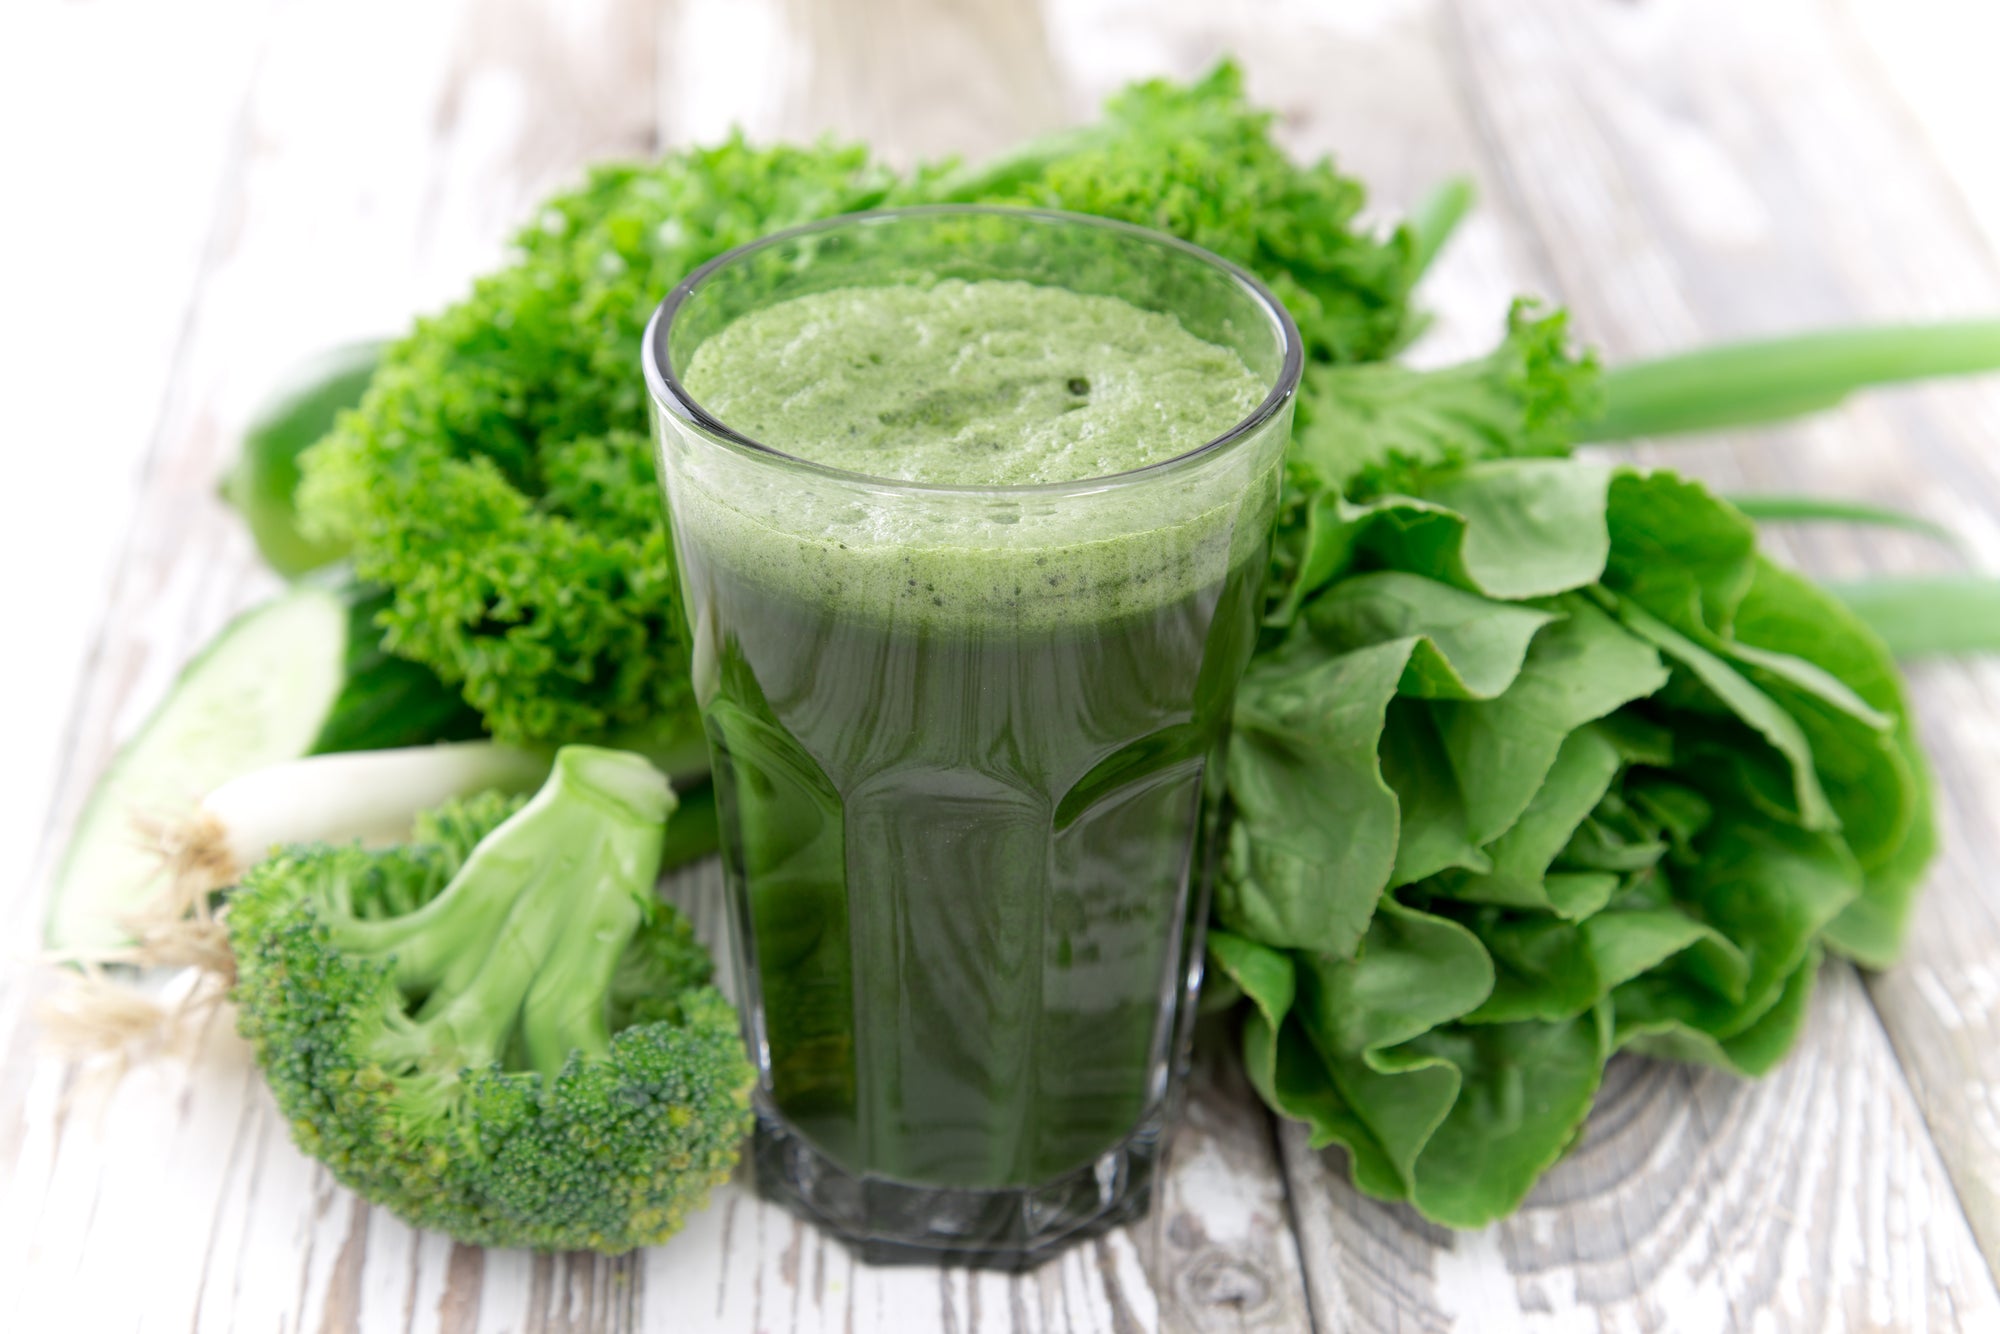 a glass of green smoothie surrounded by green vegetables on a wooden table.